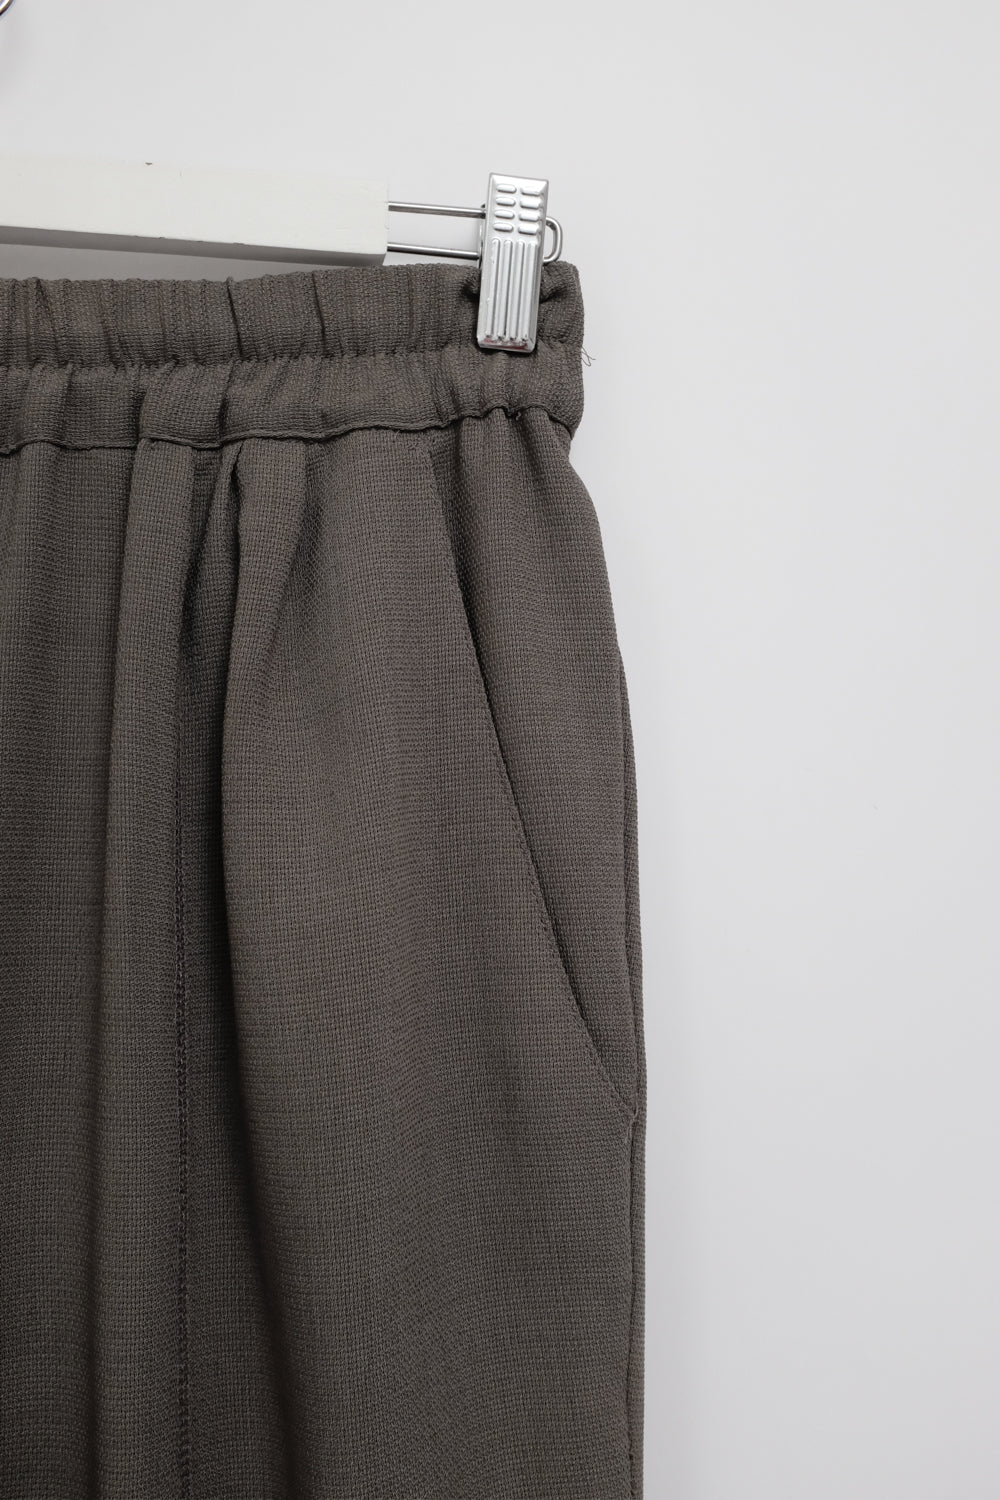 BROWN WIDE LEG RELAXED PANTS